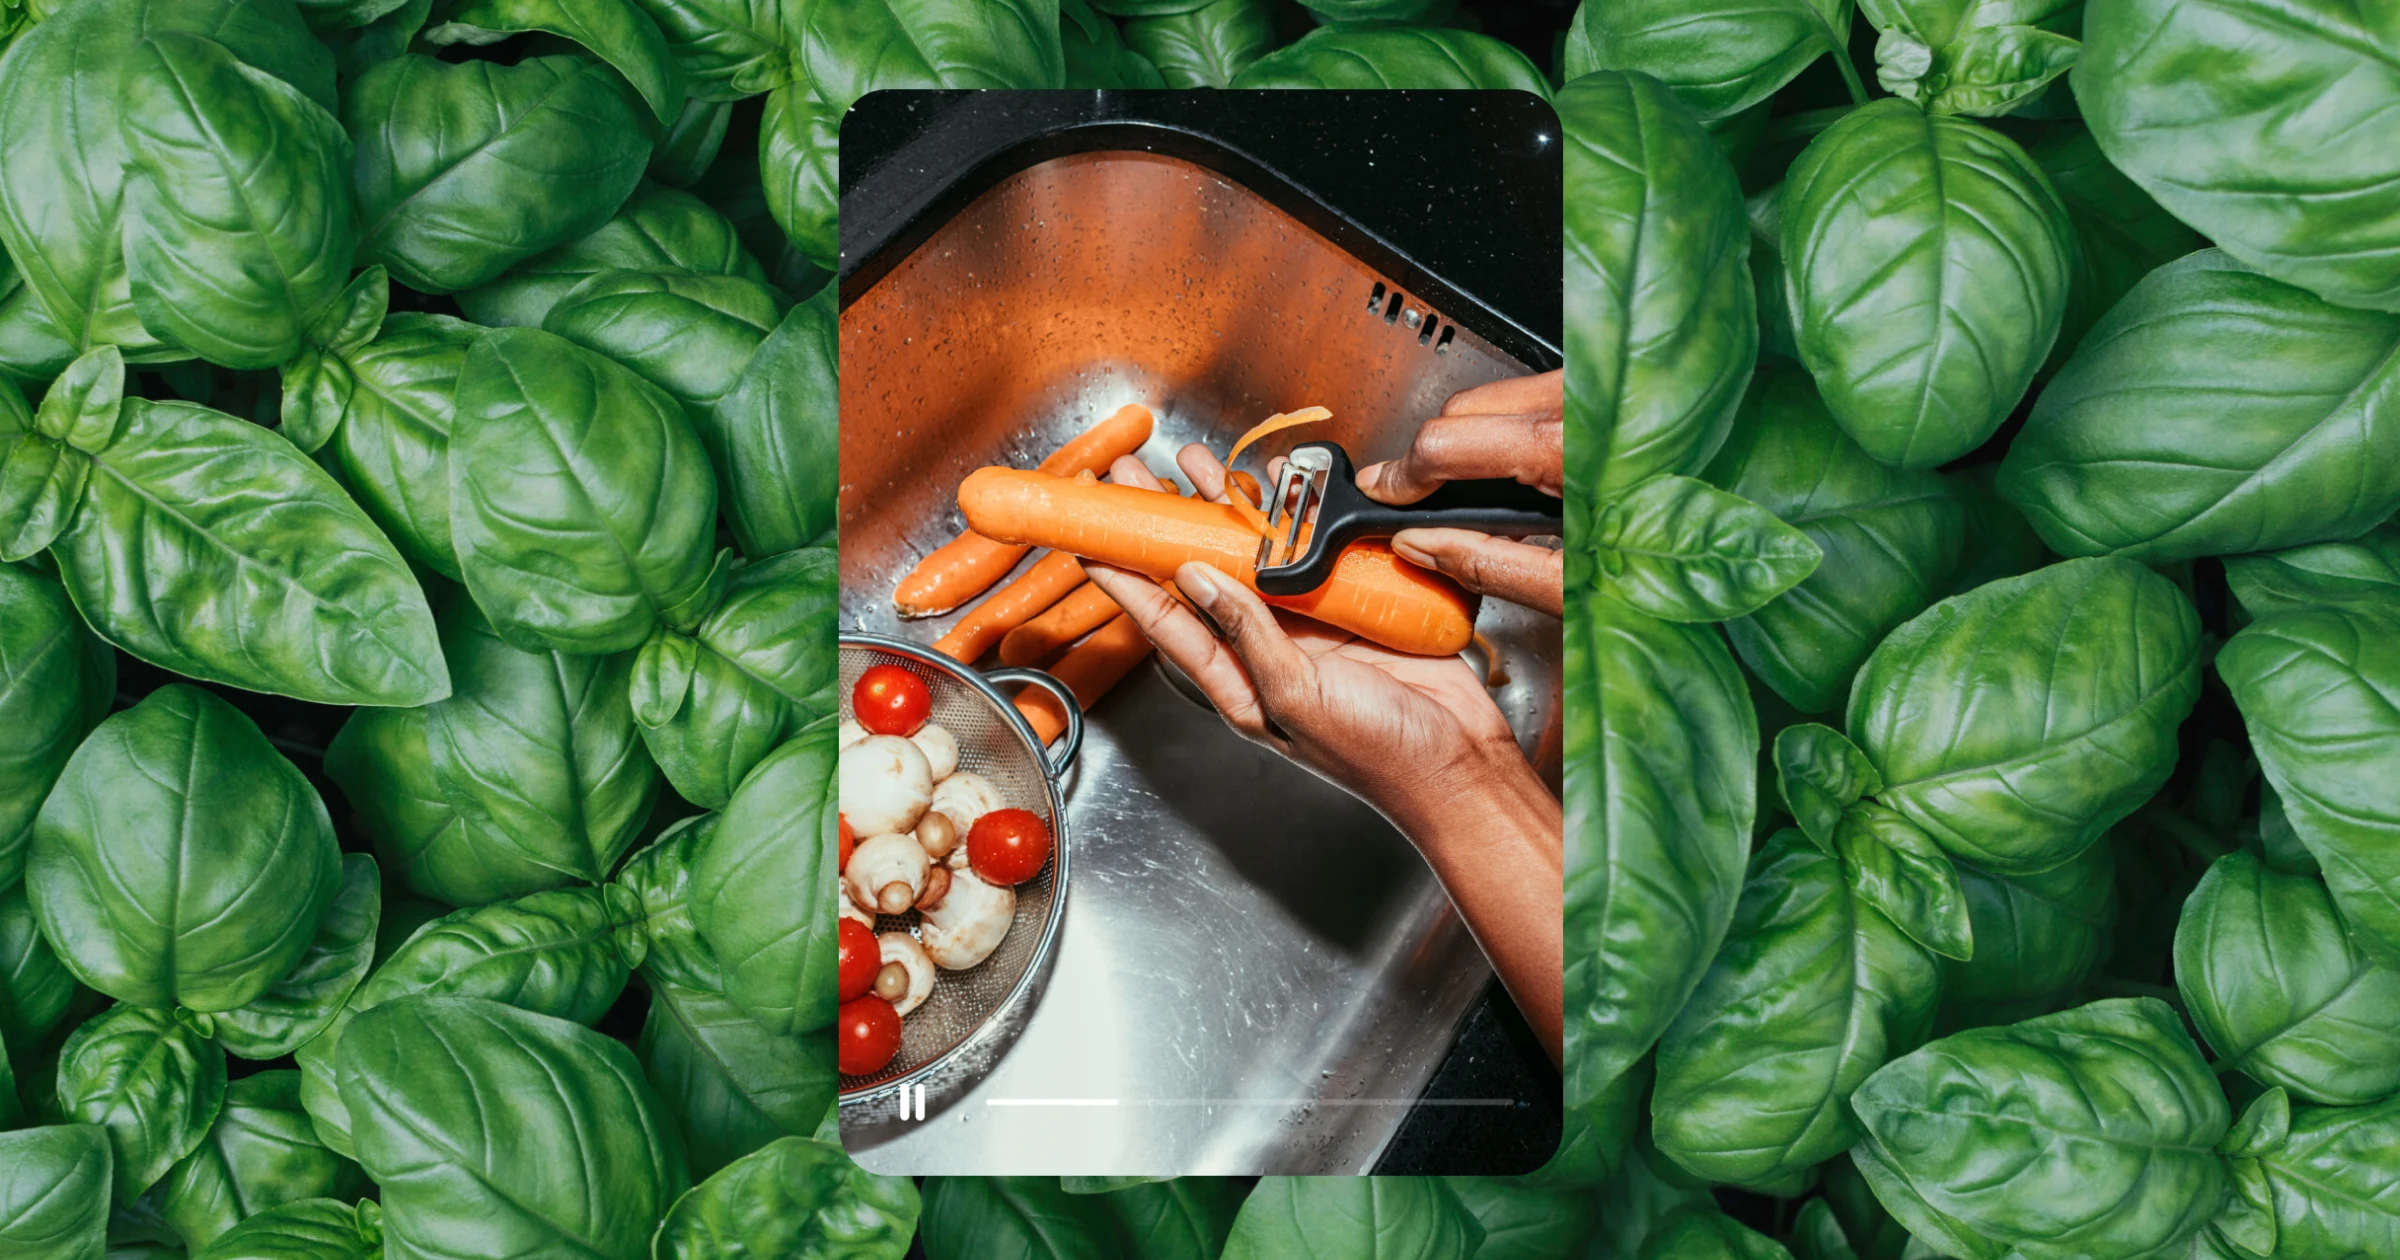 Idea Pin of Black hands peeling carrots over a bowl of tomatoes and mushrooms, centred on a background image of a basil plant.